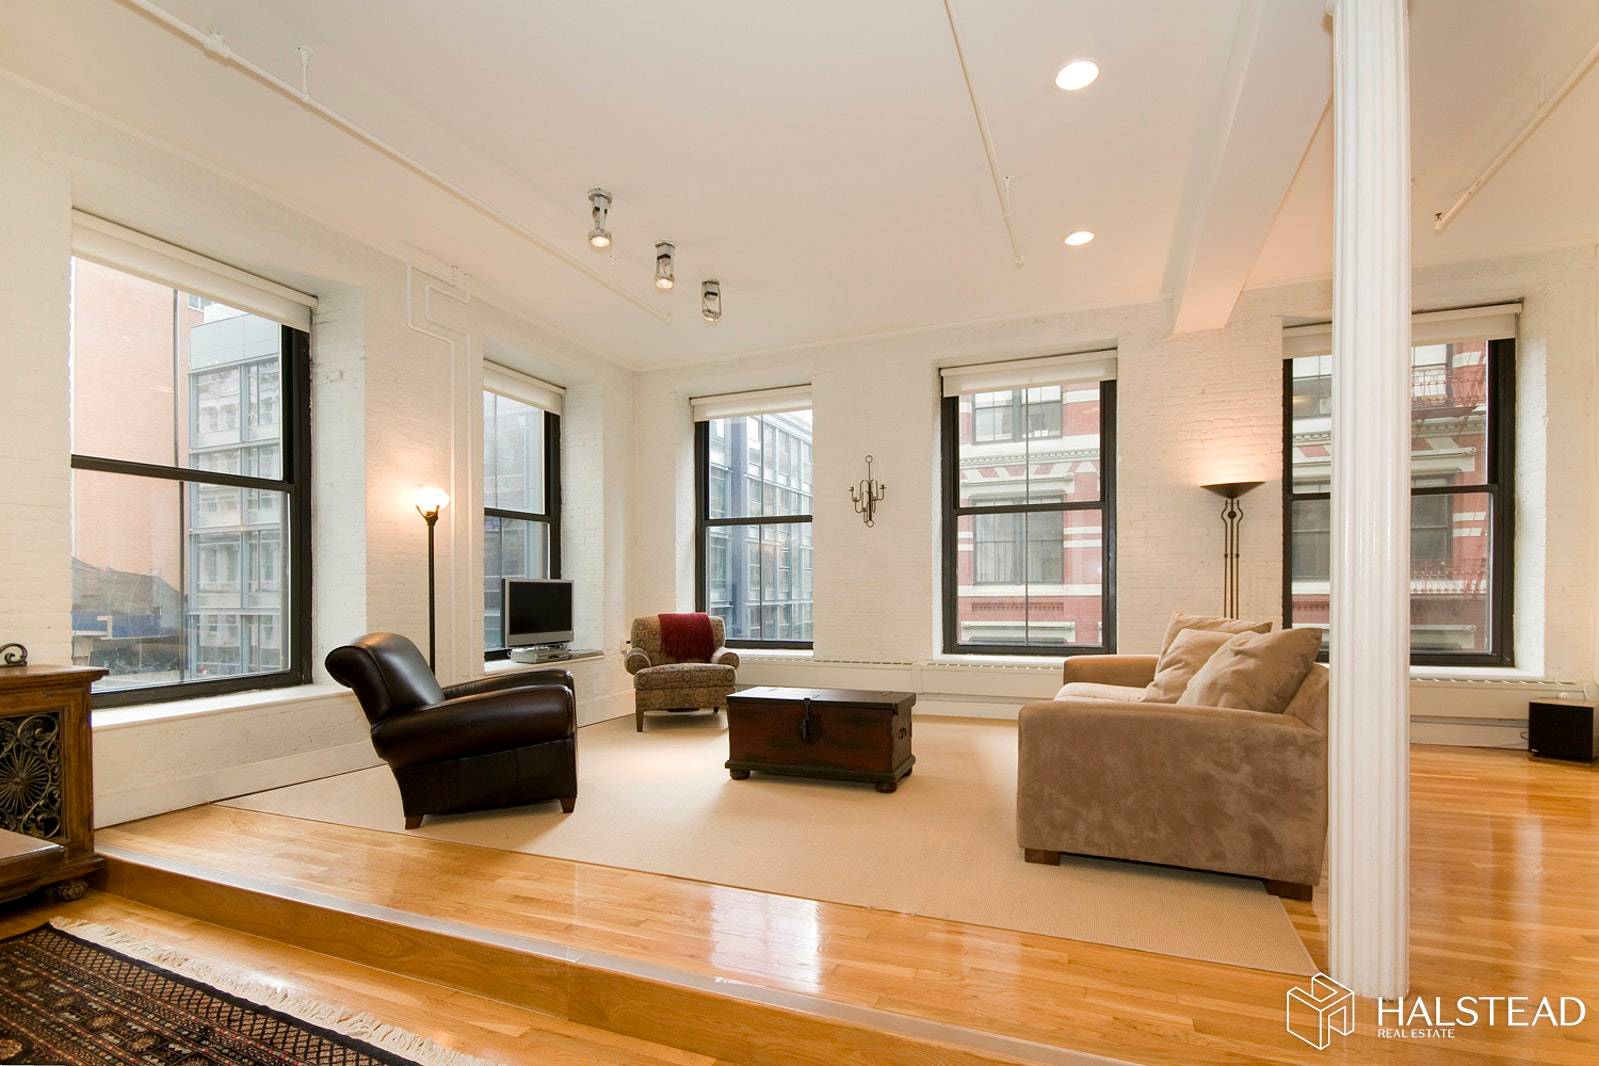 This fabulous 1650 square foot loft in the heart of historic SoHo, at Grand and Mercer, offers all the quintessential elements of an artist loft in a unique historic building ...